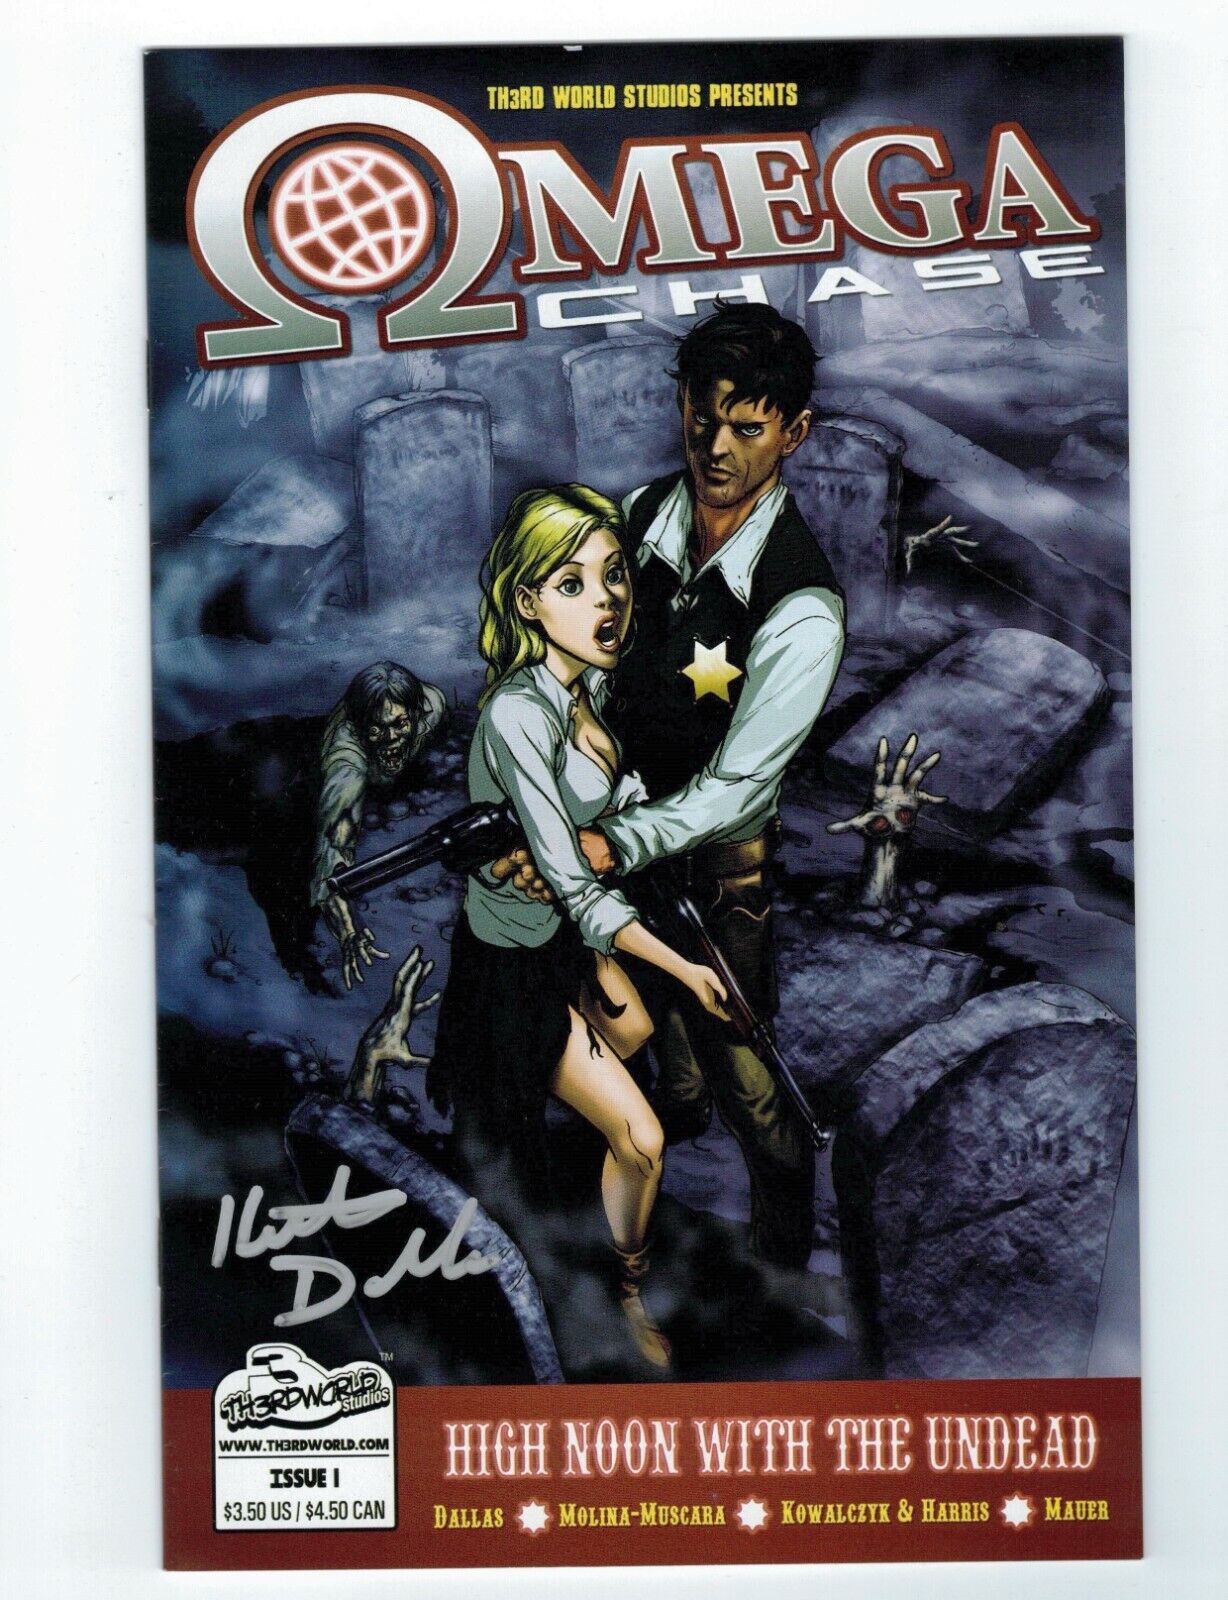 Omega Chase #1 VF+ signed by writer Keith Dallas - Th3rd World Studios comic